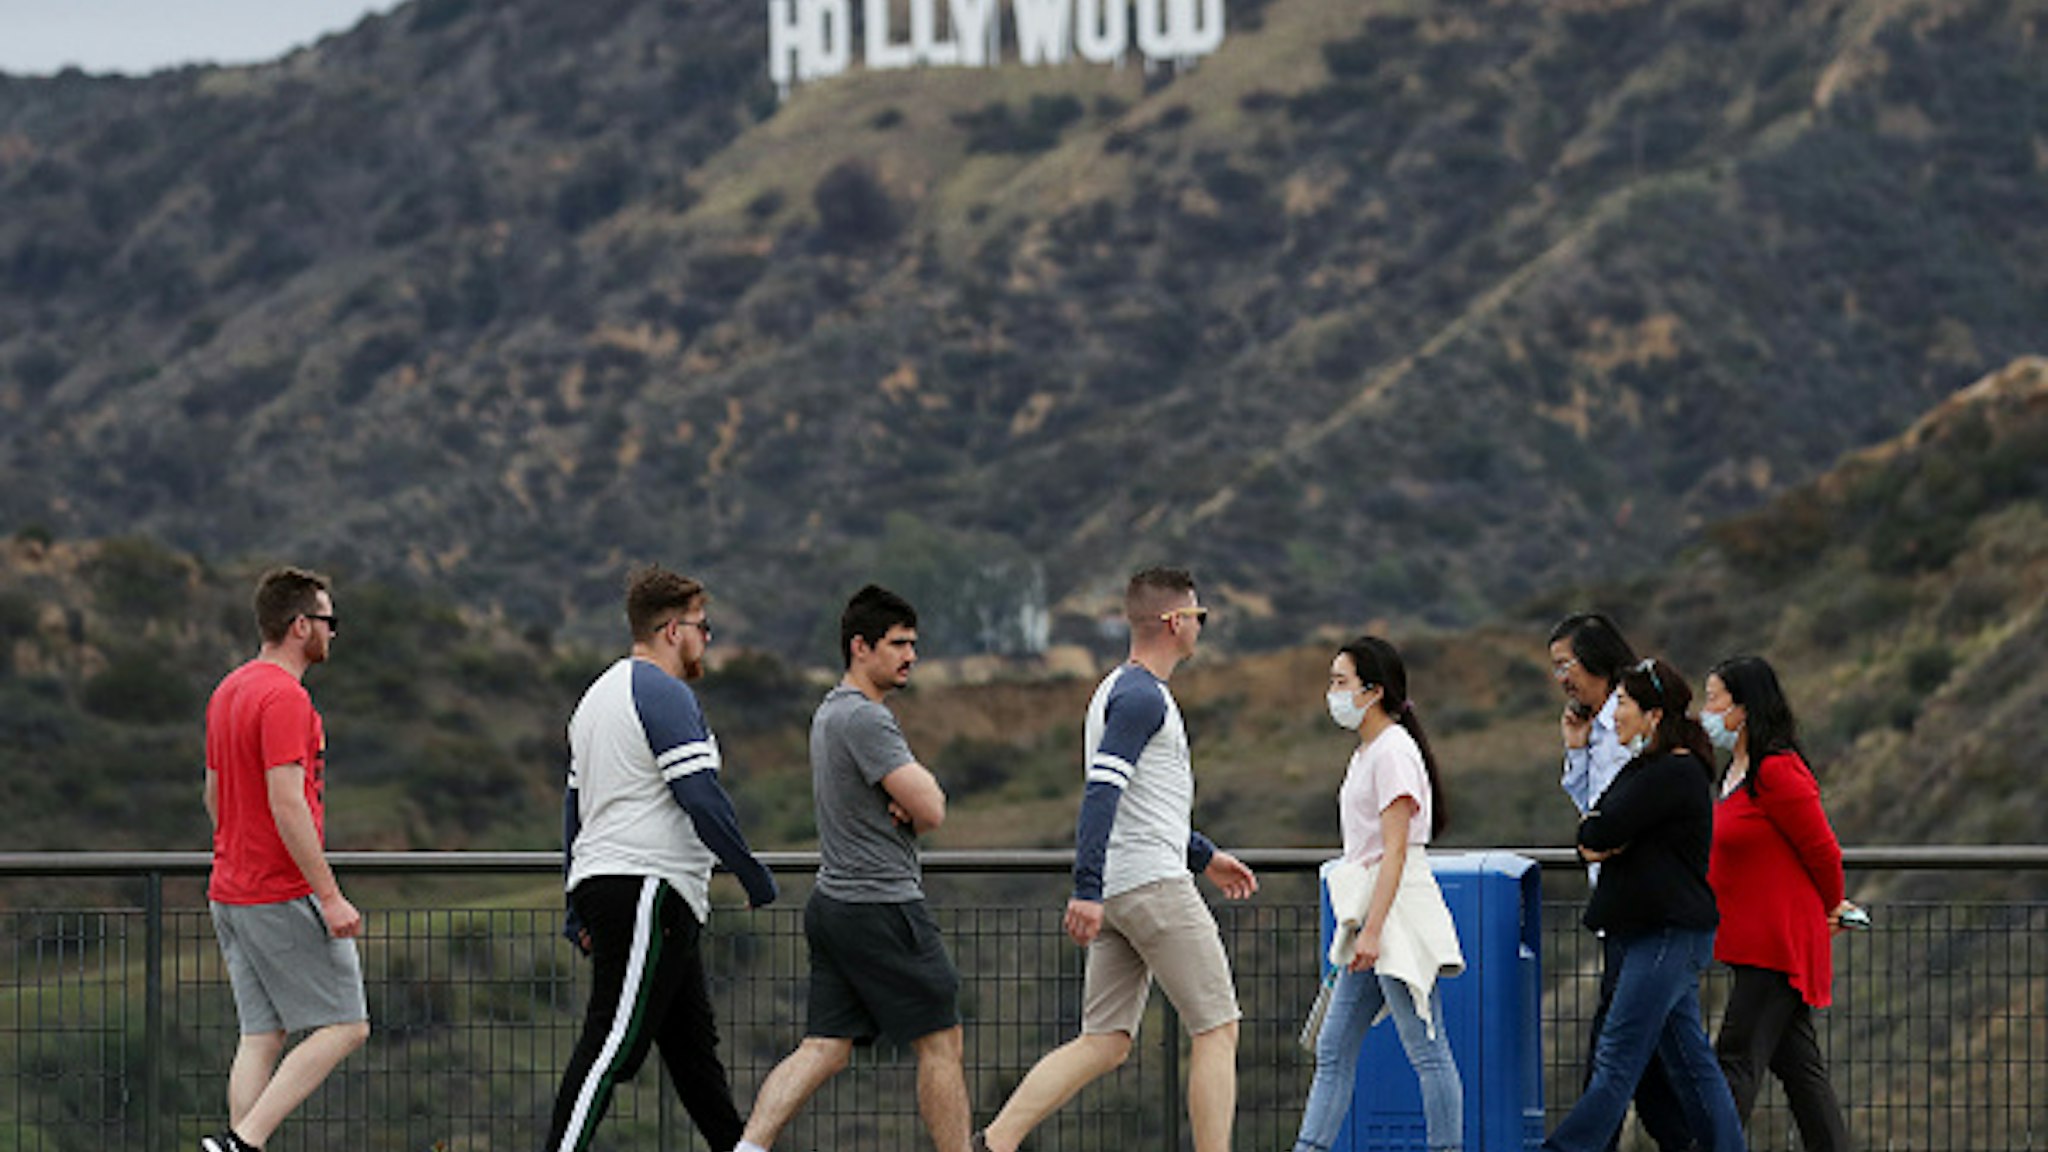 LOS ANGELES, CALIFORNIA - MARCH 22: People, some wearing face masks, walk in Griffith Park with the Hollywood sign behind them on March 22, 2020 in Los Angeles, California. California Governor Gavin Newsom issued a ‘stay at home’ order for California’s 40 million residents in order to slow the spread of coronavirus (COVID-19). Californians may still visit parks without violating Newsom’s order as long as they maintain social distancing and adhere to other public health measures related to the coronavirus. Los Angeles Mayor Eric Garcetti today urged Angelenos to practice physical distancing after crowds were seen at some beaches and hiking trails this weekend.